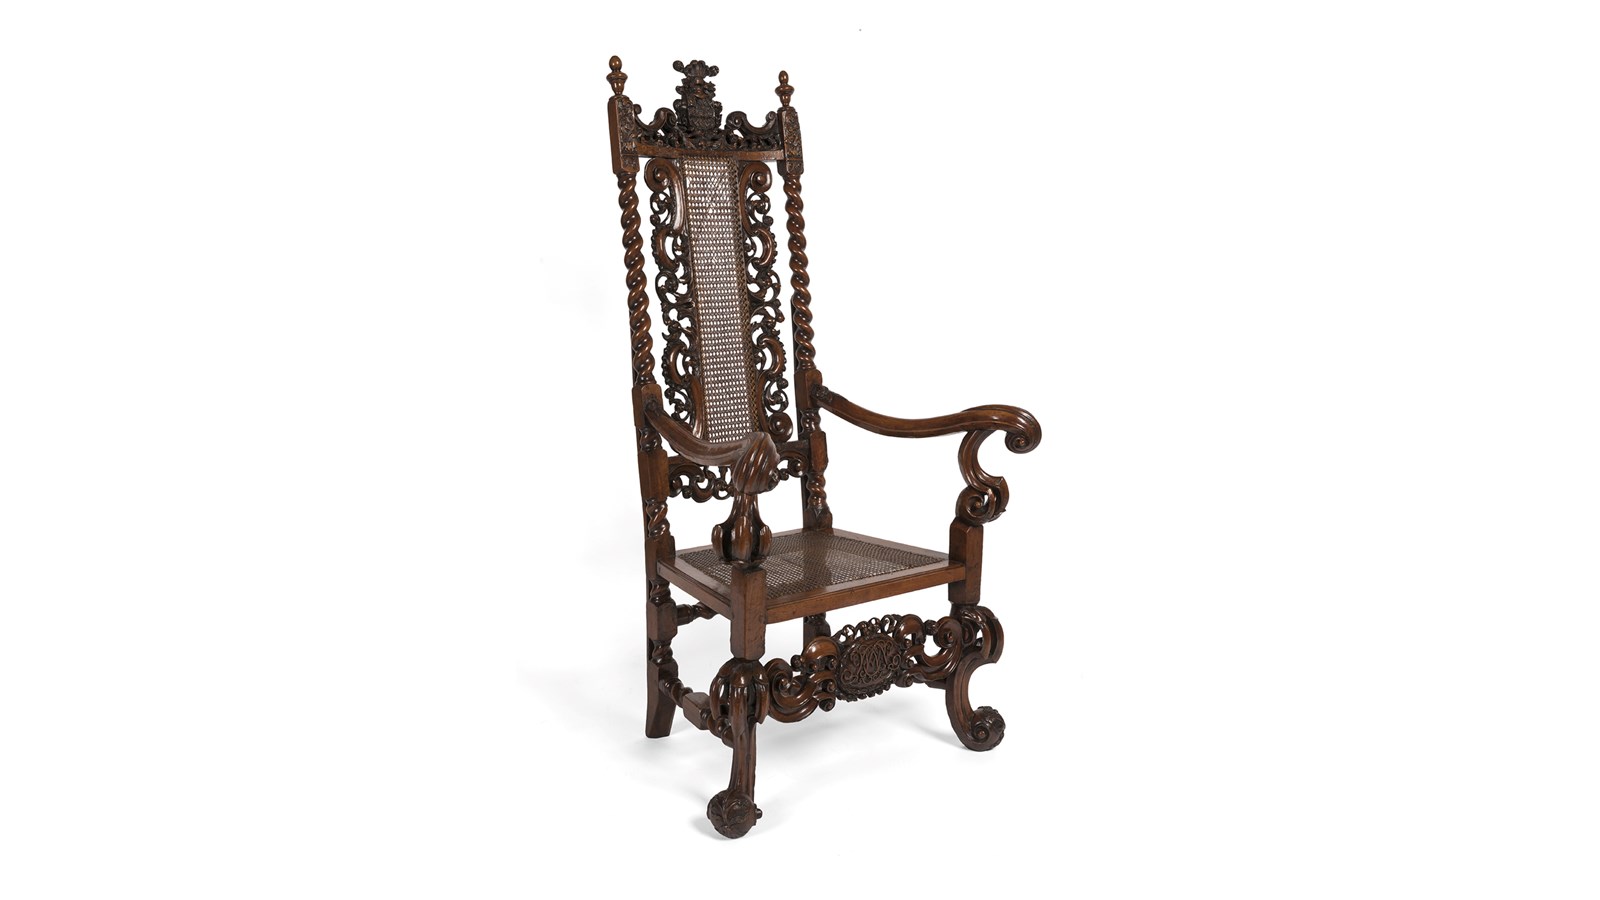 an ornately carved dark wood chair